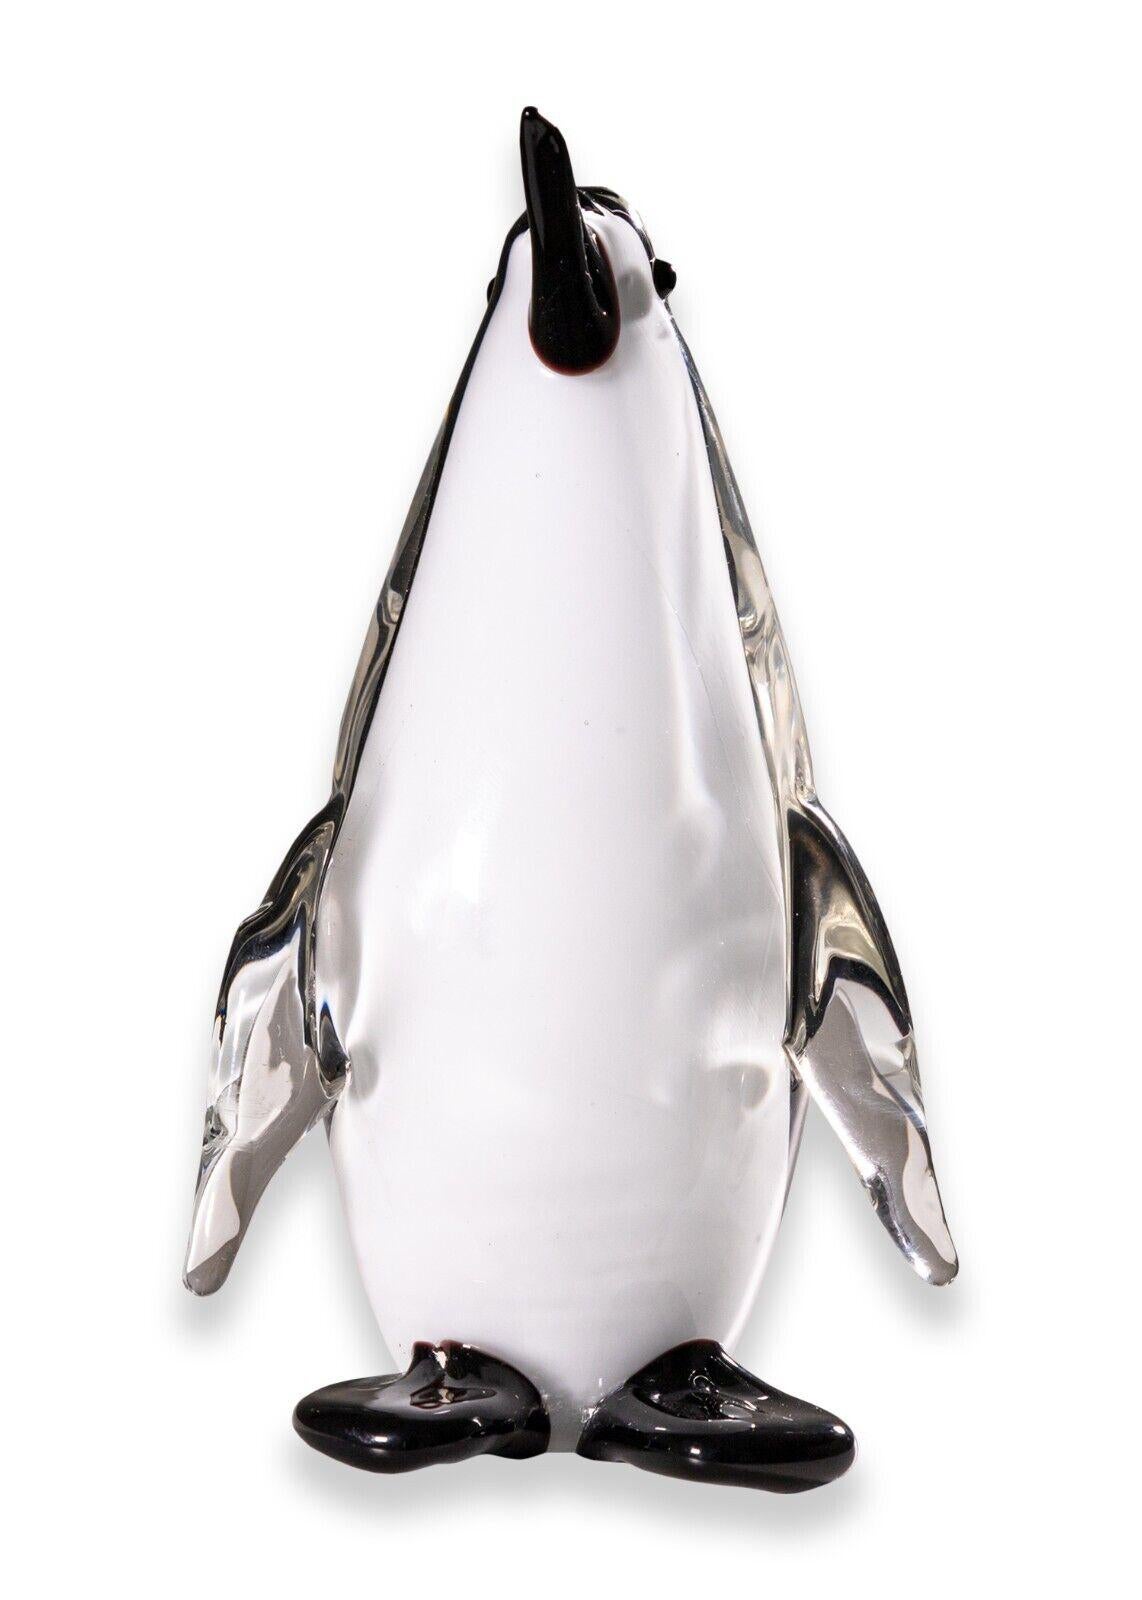 A Murano art glass penguin figurine sculpture with original tag. A super cute little glass figurine of a quaint little penguin. This glass piece is from world renown glass maker Murano. This piece also features the original Murano tagging on the